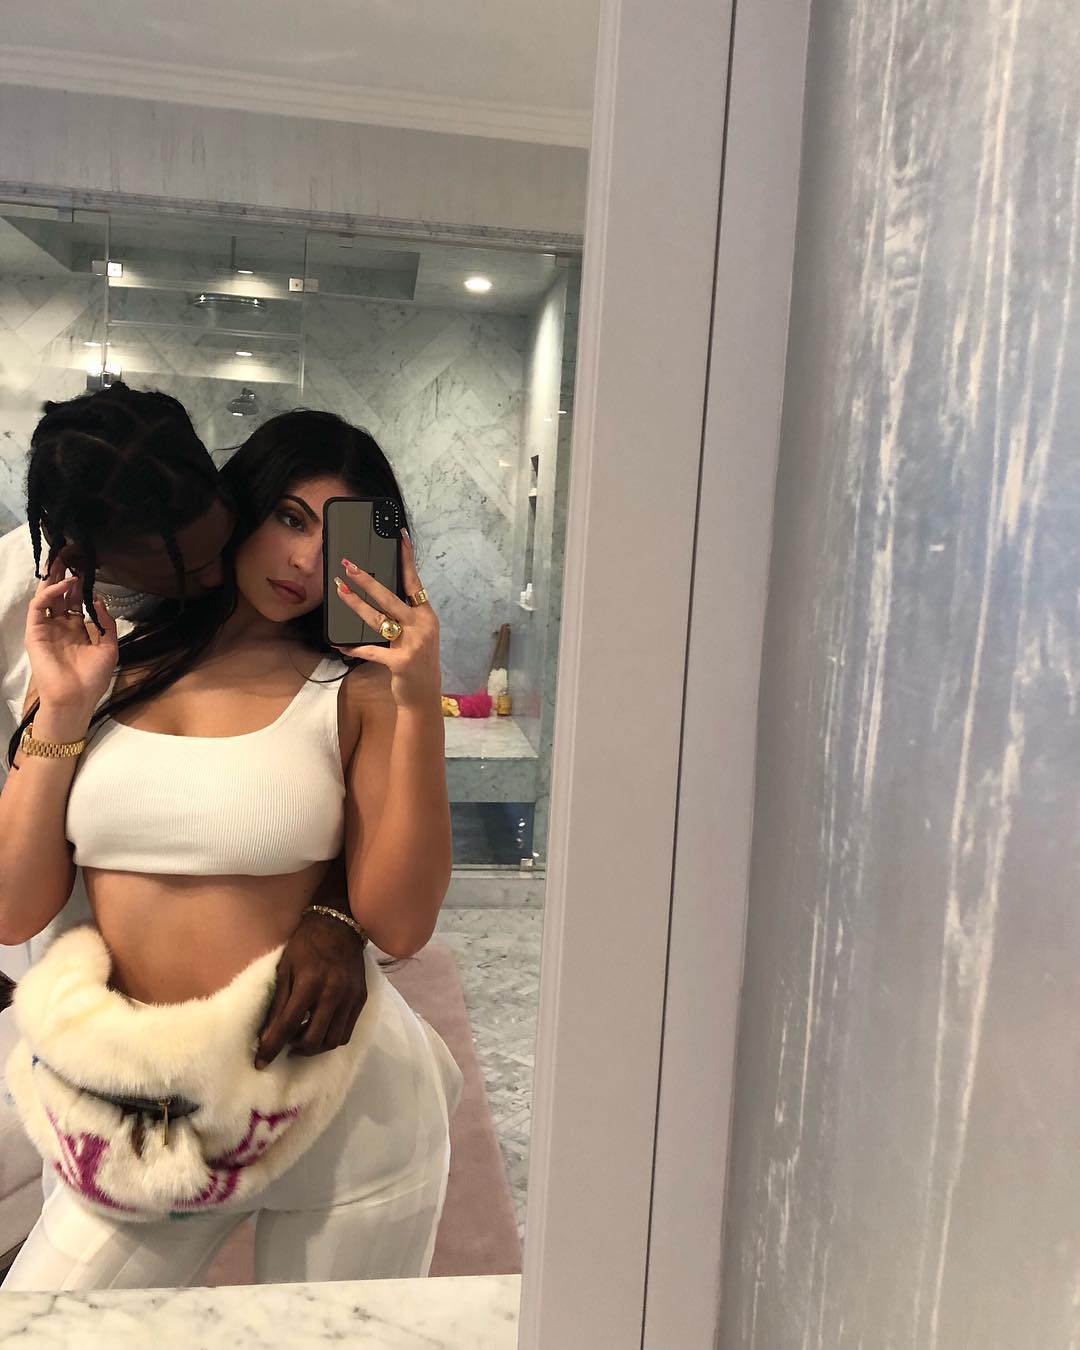 Kylie Jenner Gifted Travis Scott A Lamborghini For Birthday And Called Him 'Hubby' In Latest Post